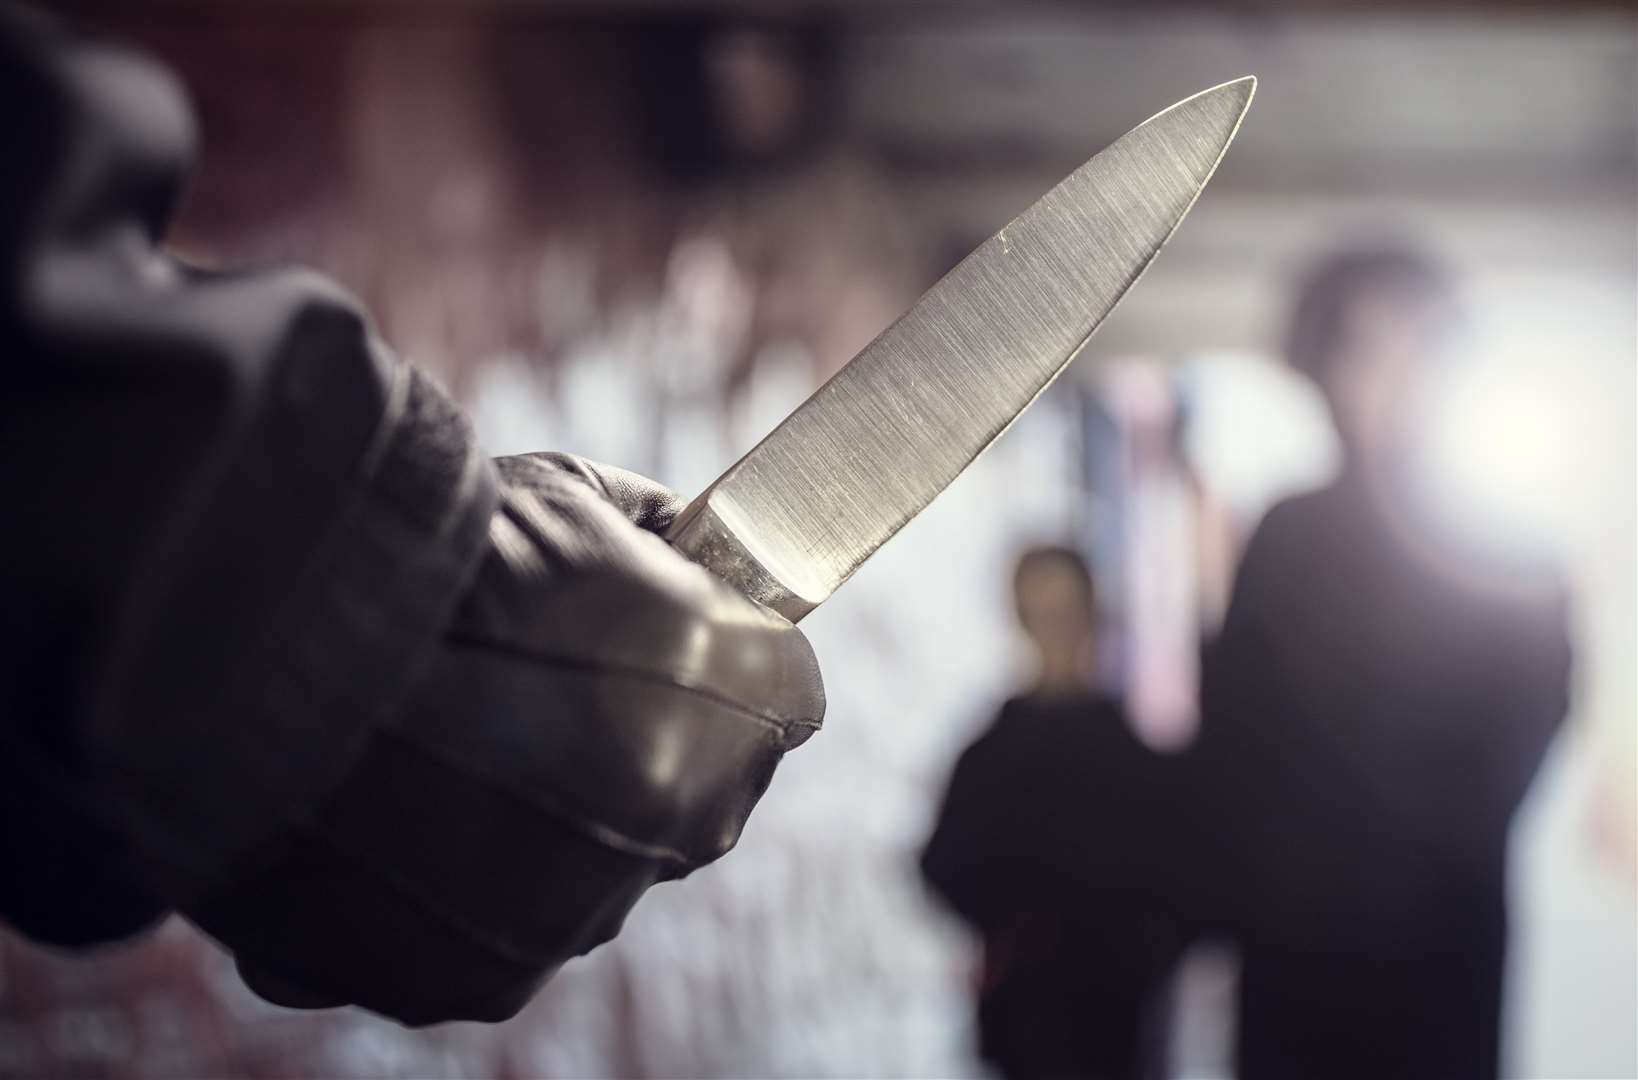 Knife related crimes have fallen by 3% in the last year but increased by 146% in the last decade